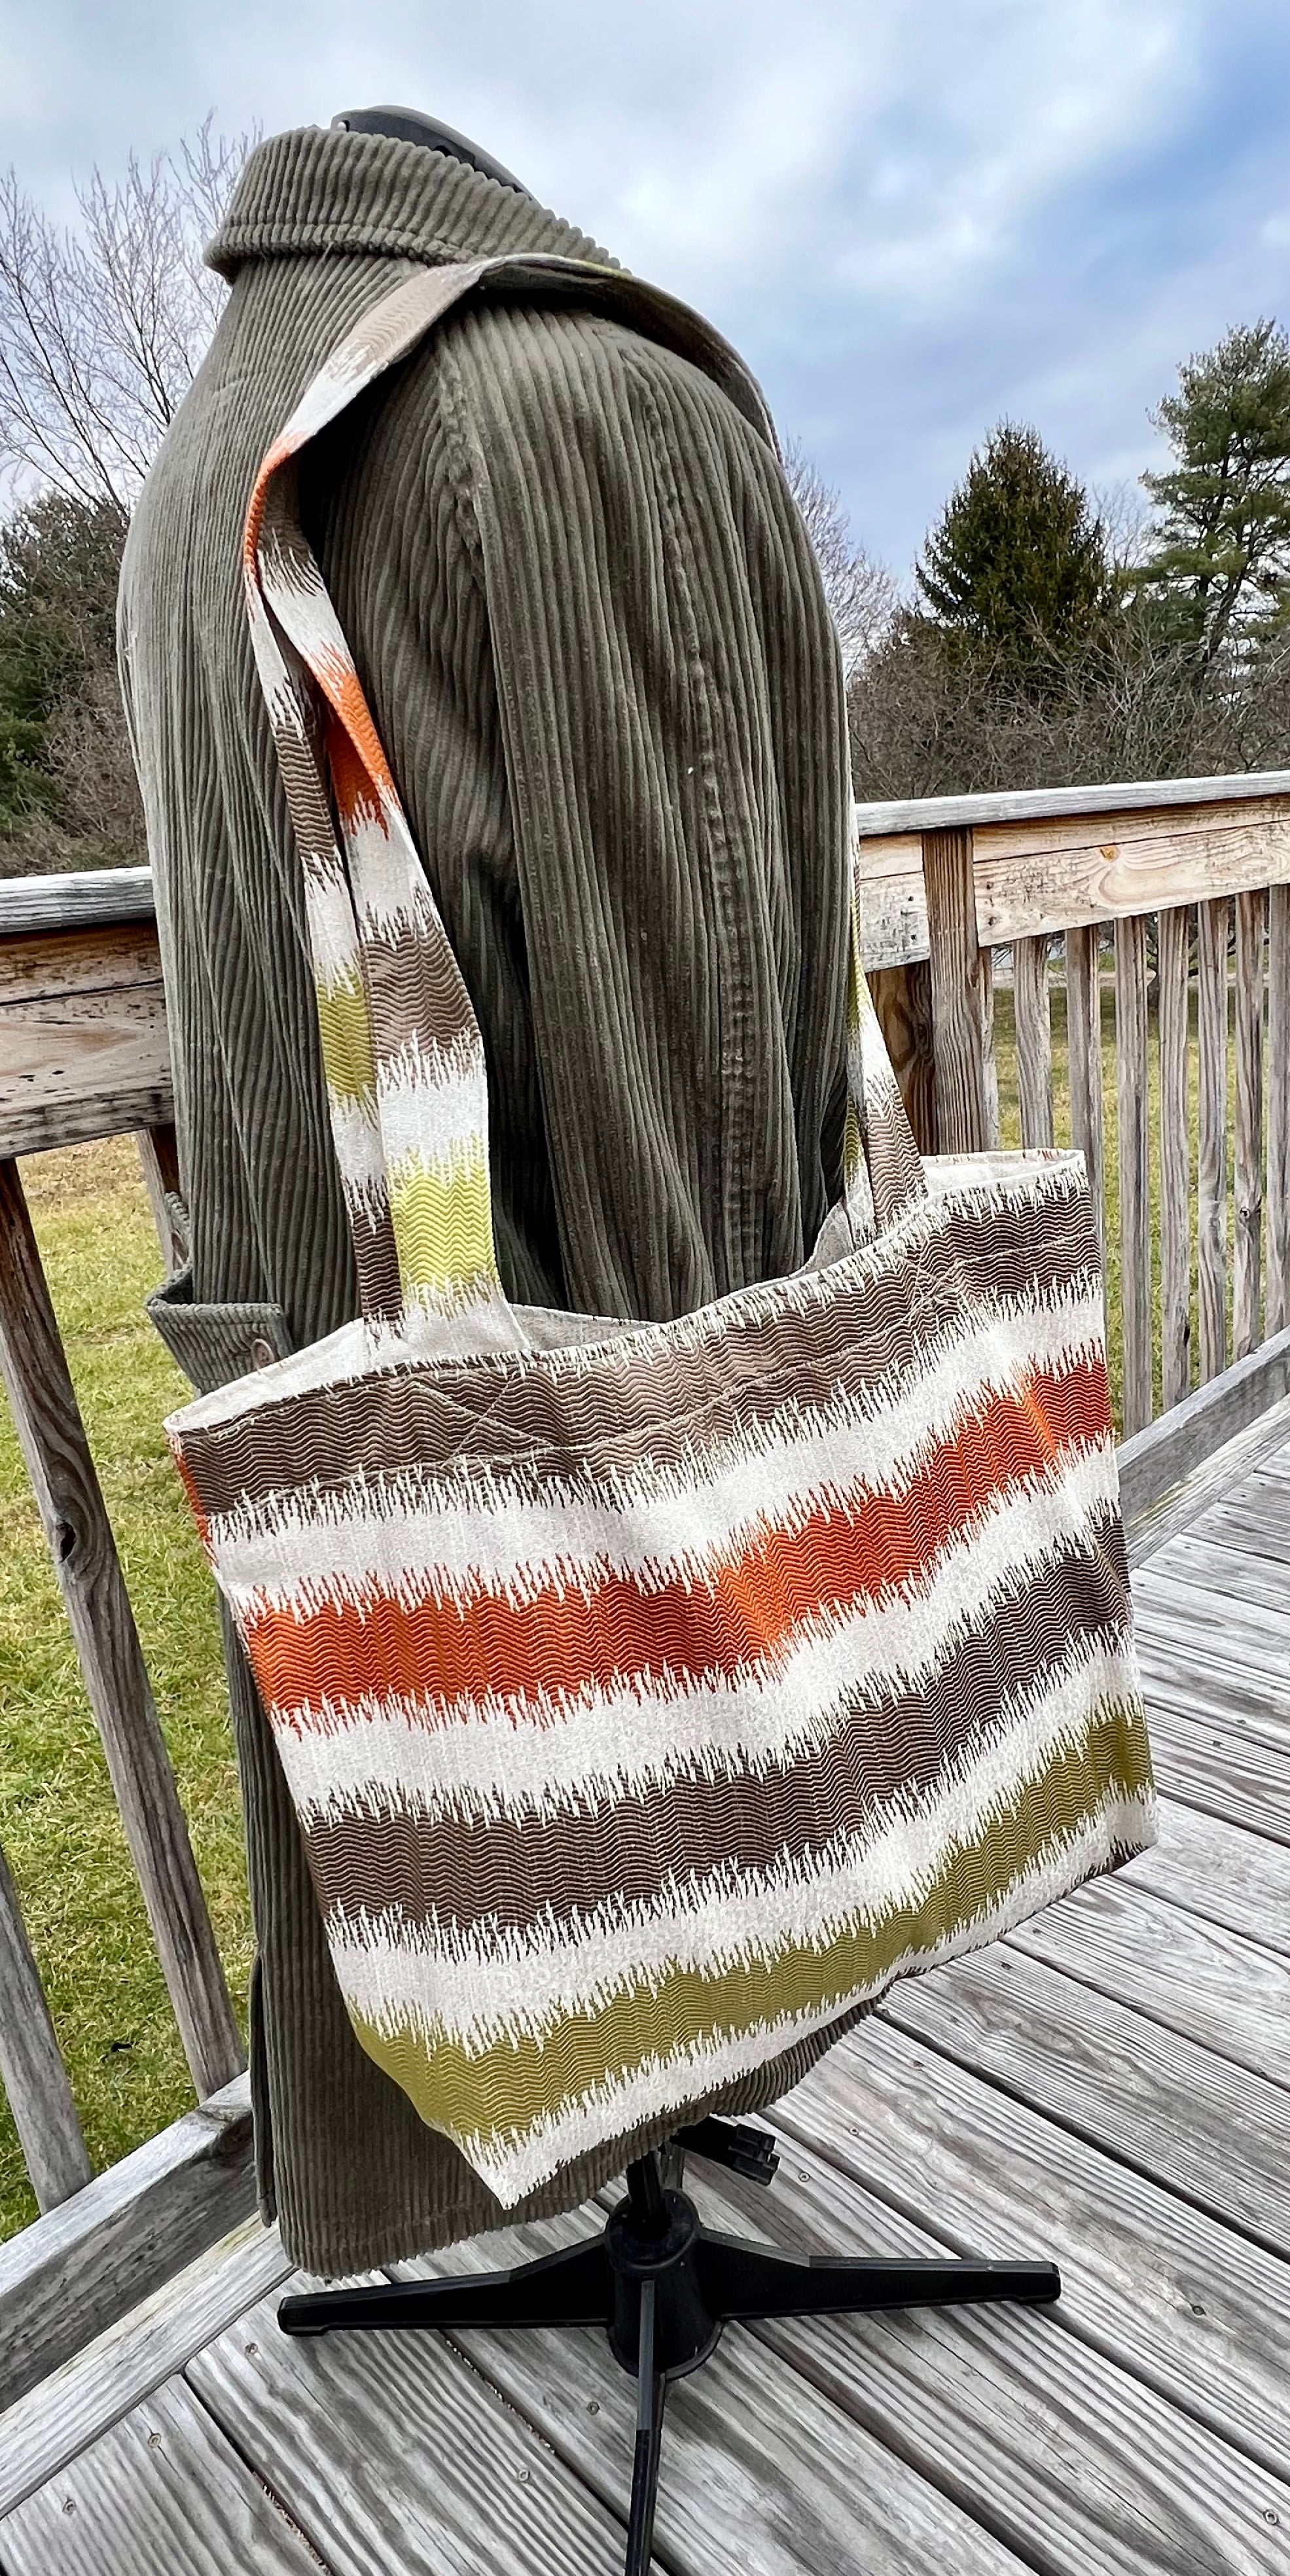 Market Grocery Tote Bag Olive Rust Tan Wavy Stripes